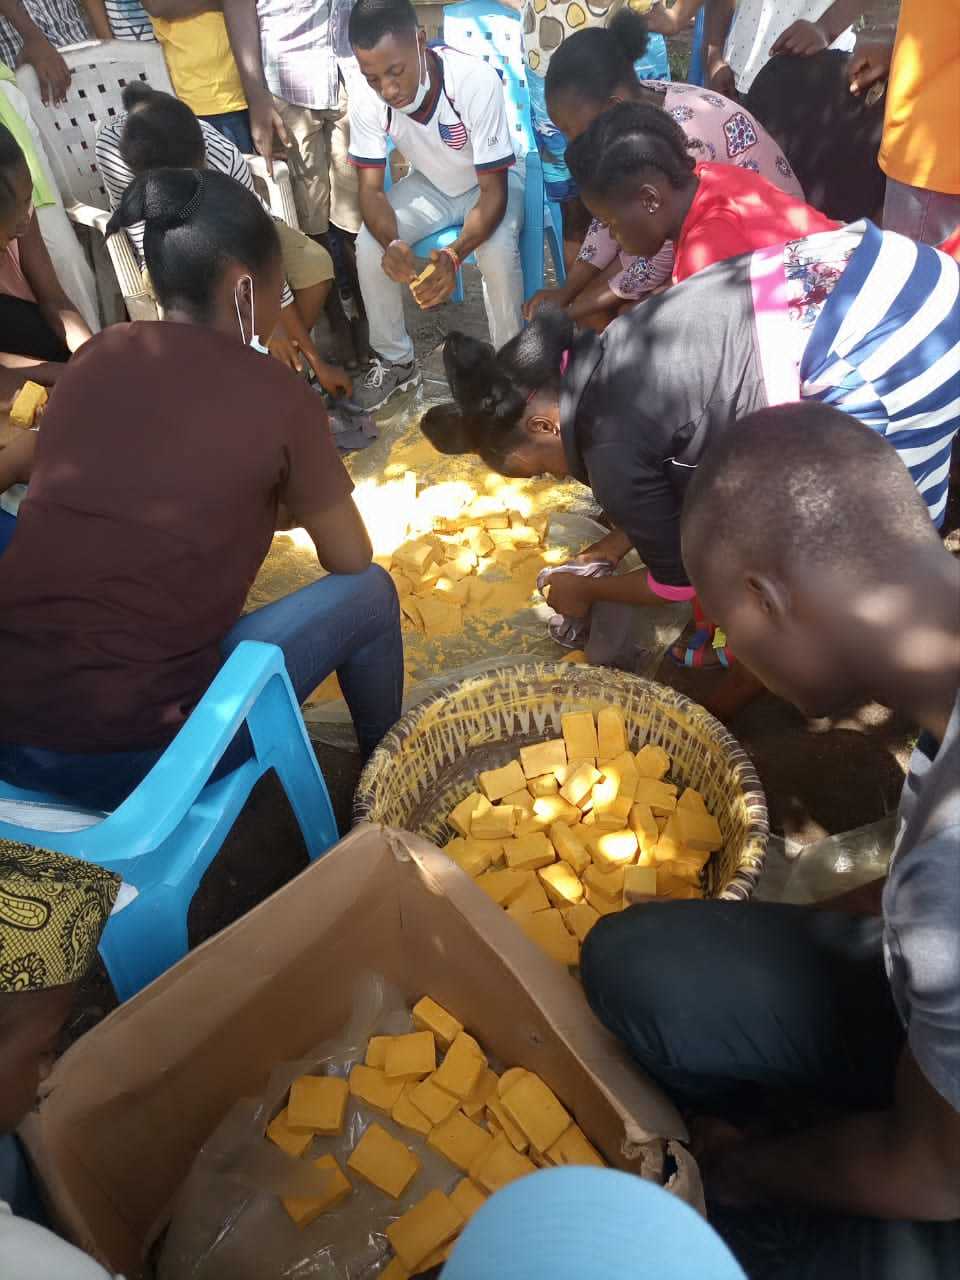 Participants crowding around baskets and buckets of yellow soap.